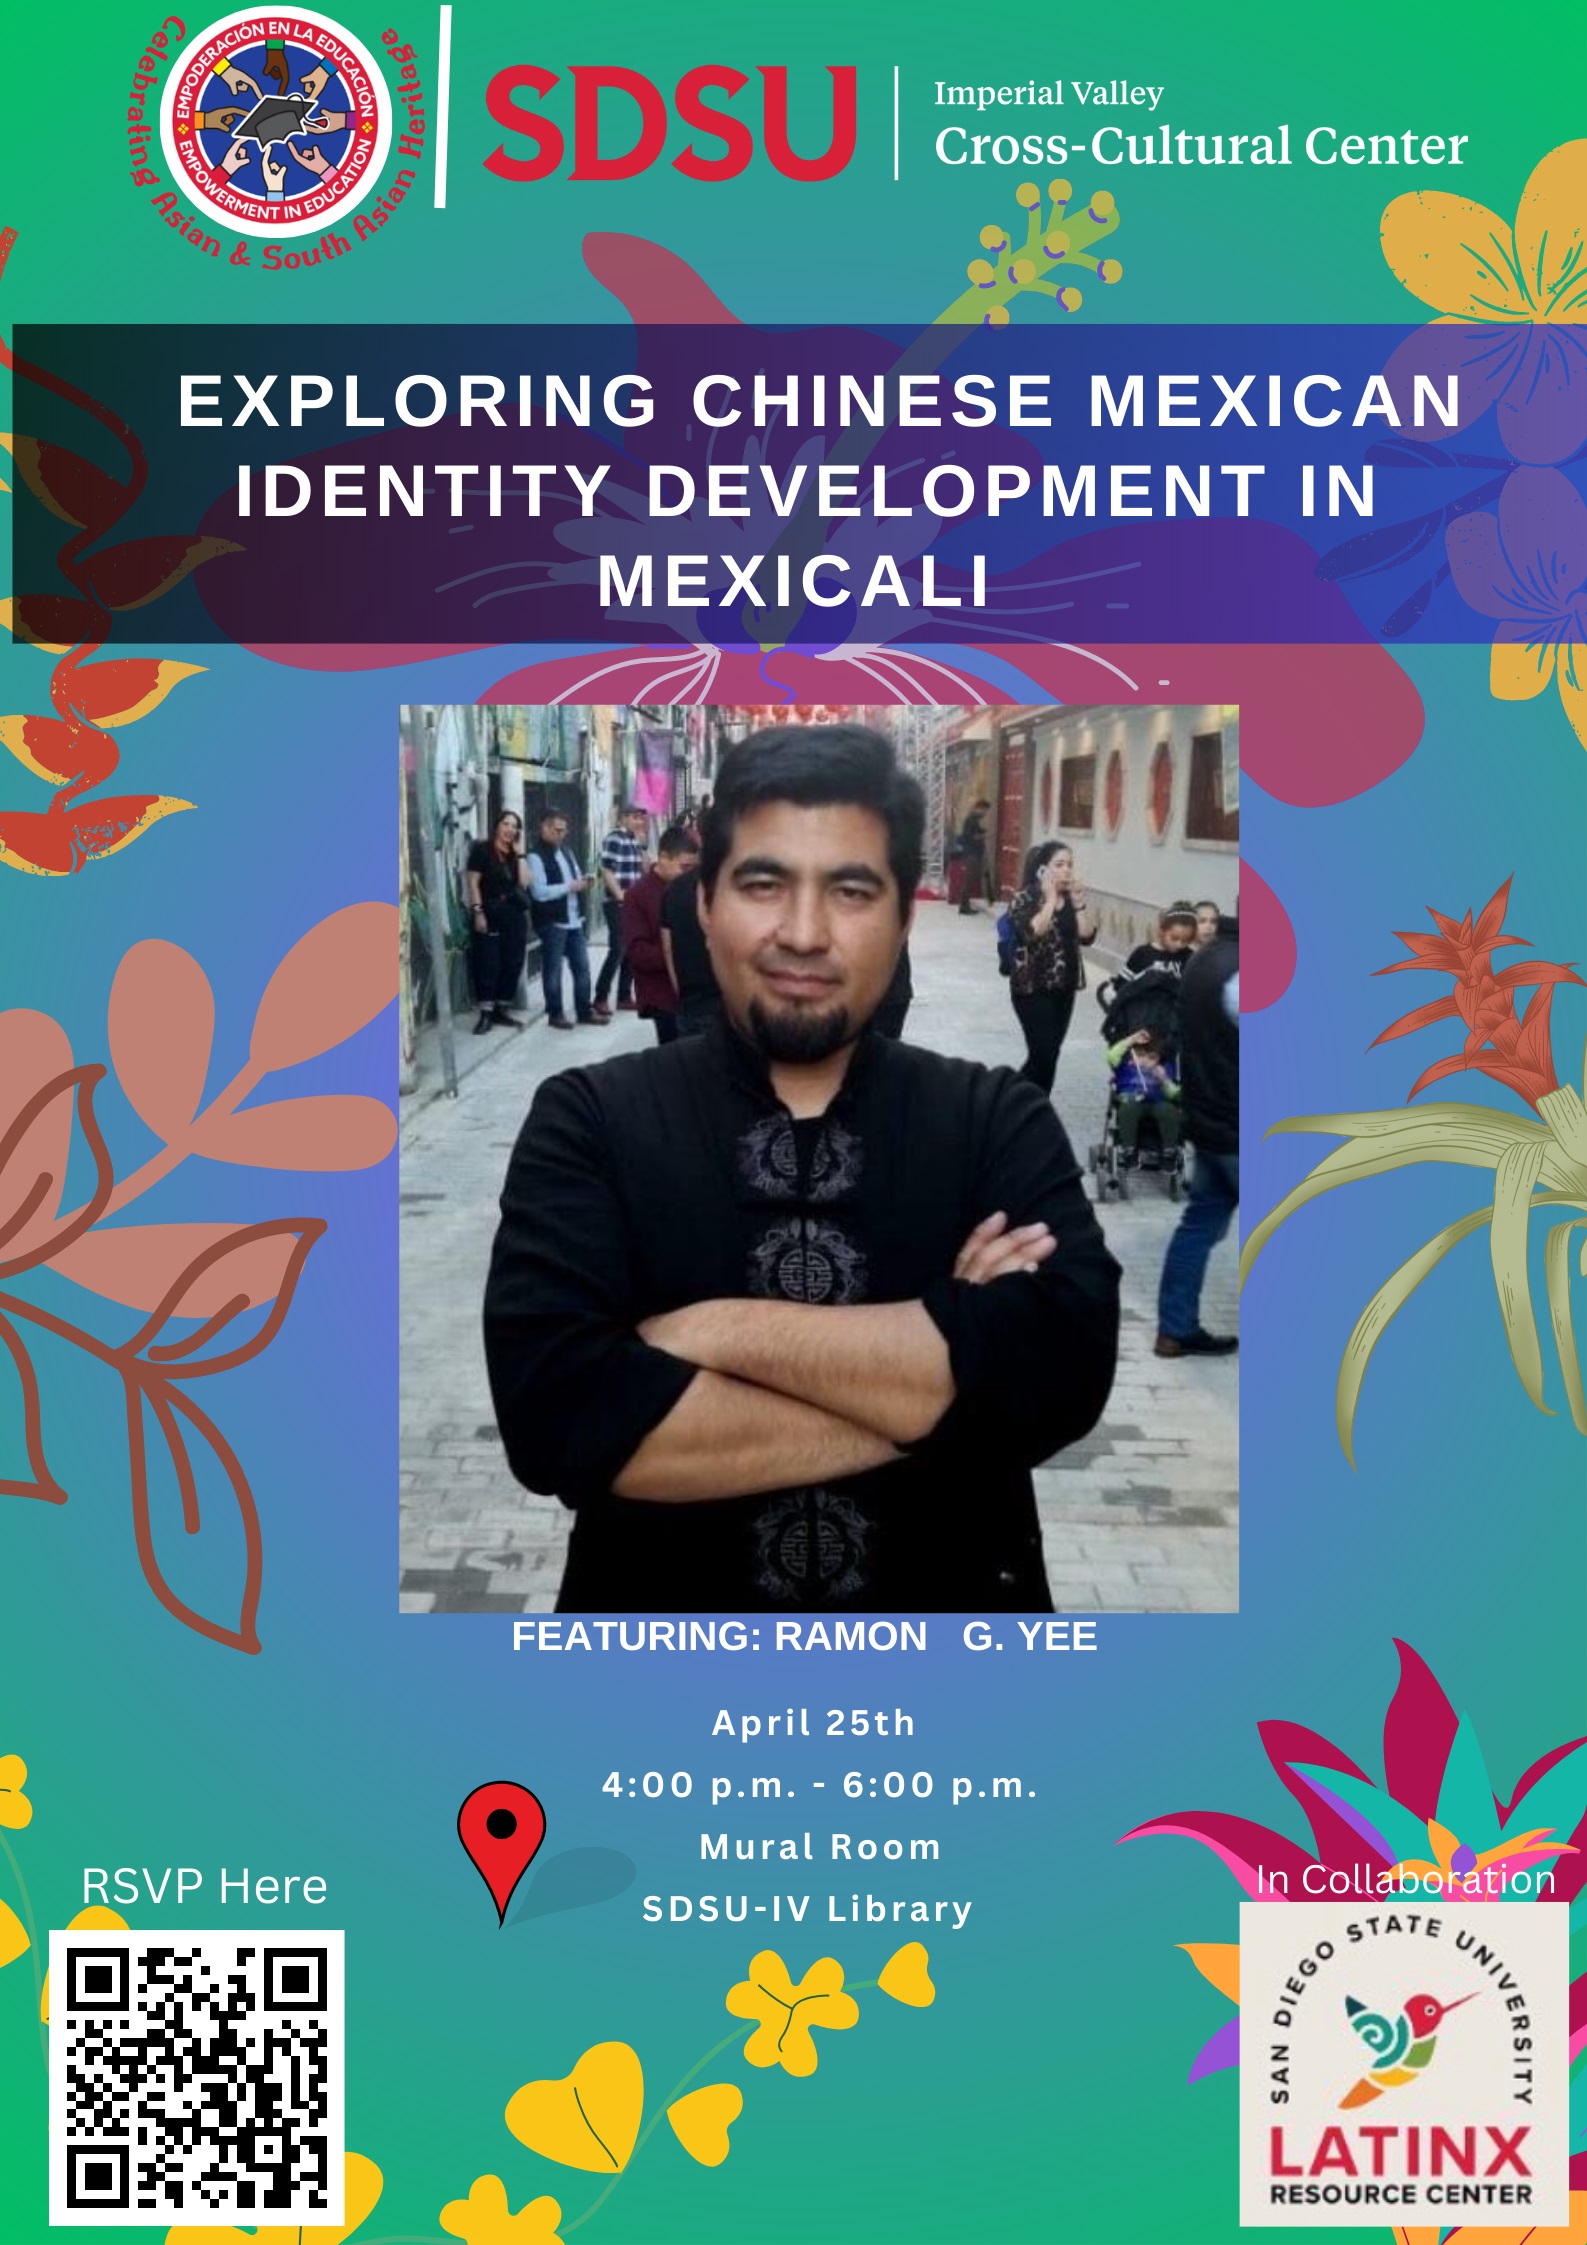 Exploring Chinese Mexican Identity Development in Mexicali featuring Ramon G. Yee, April 25th 4:00pm through 6:00pm